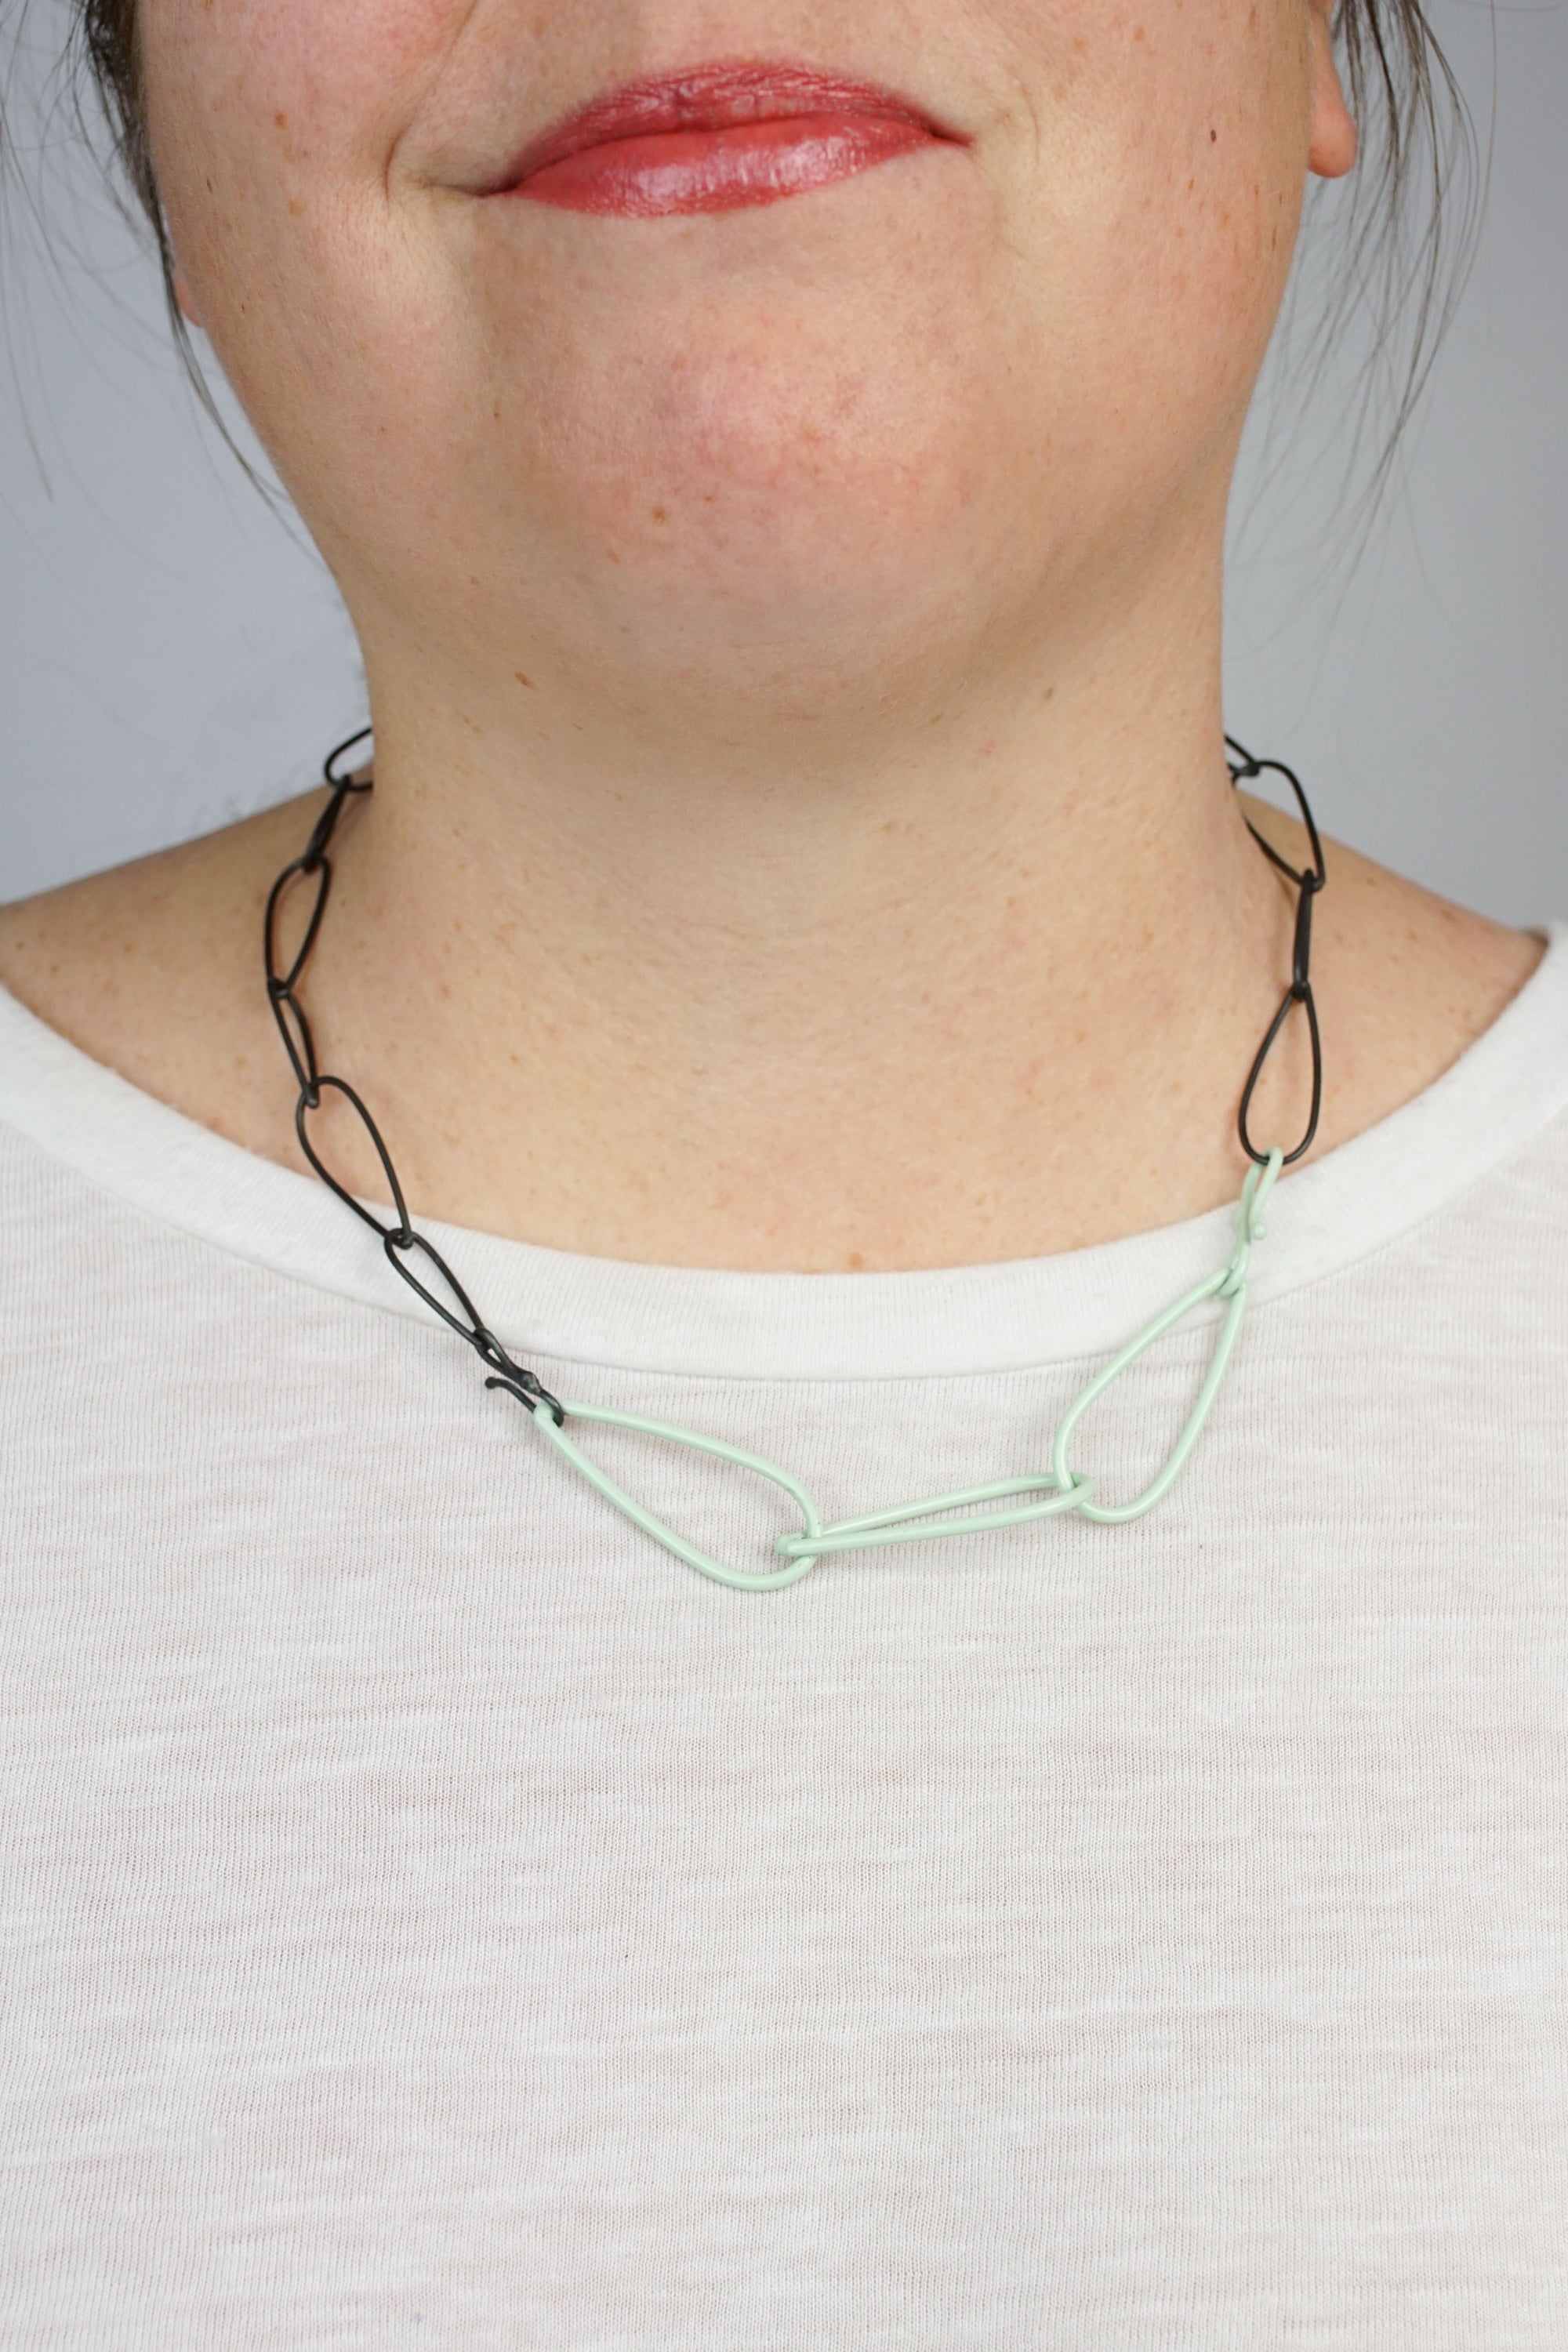 Modular Necklace in Steel and Soft Mint